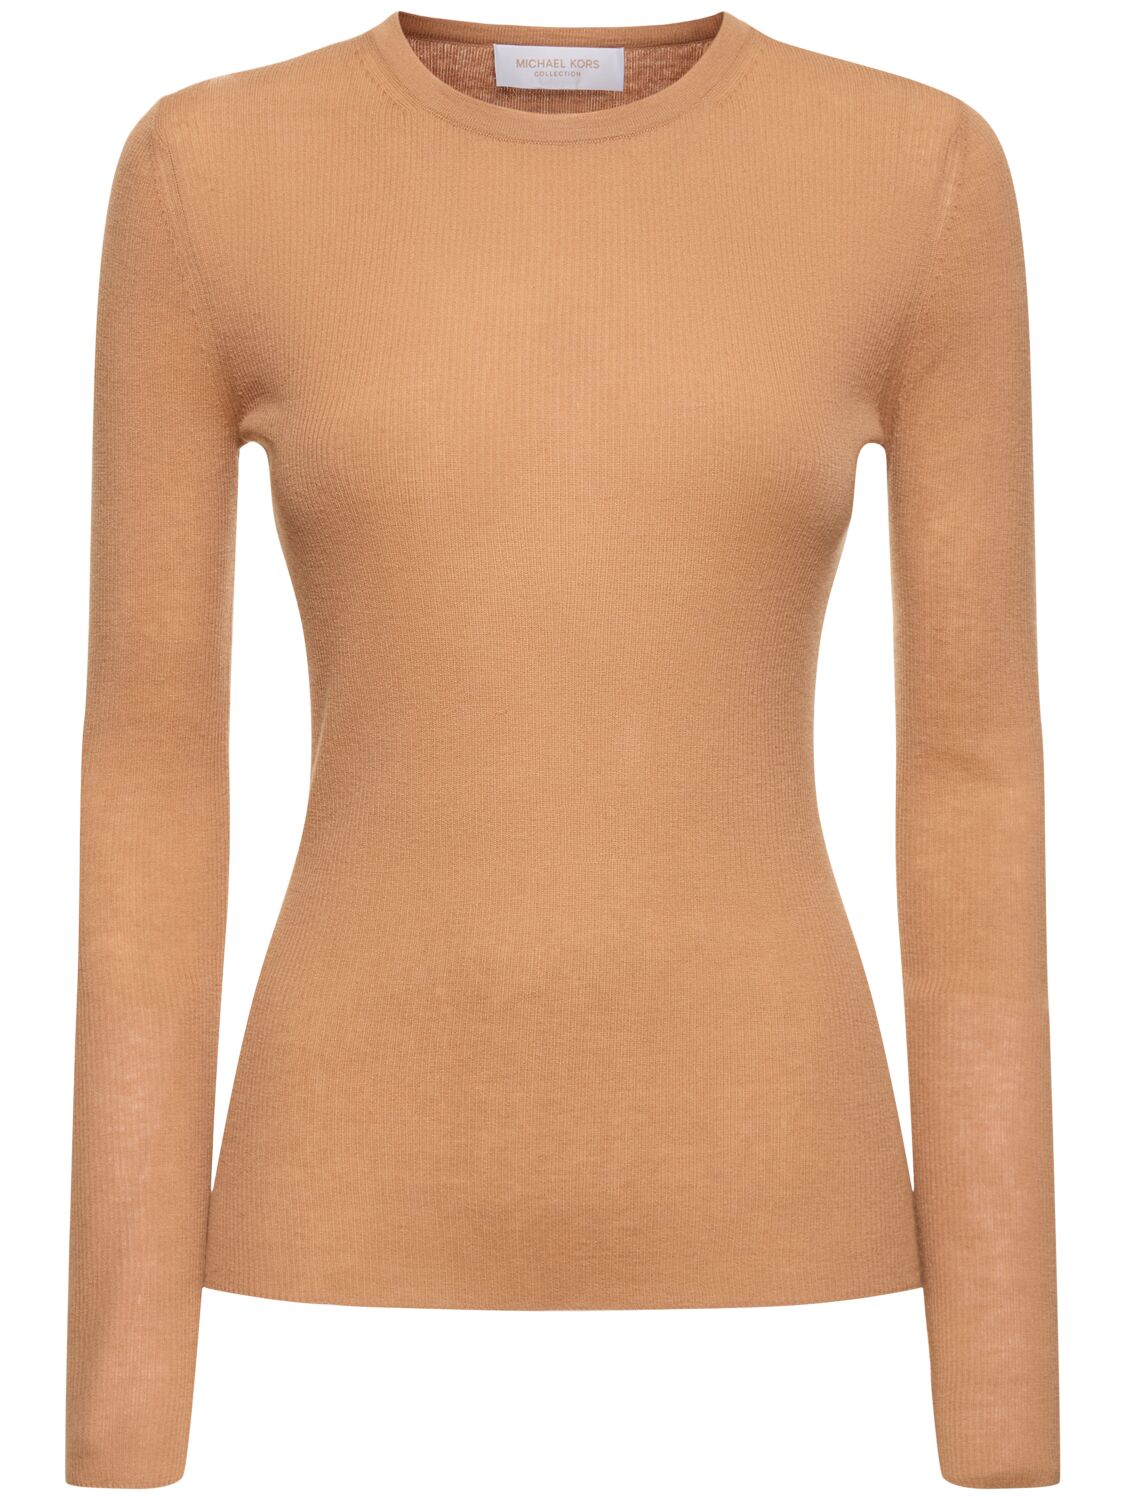 Michael Kors Hutton Cashmere Boatneck Sweater In Brown